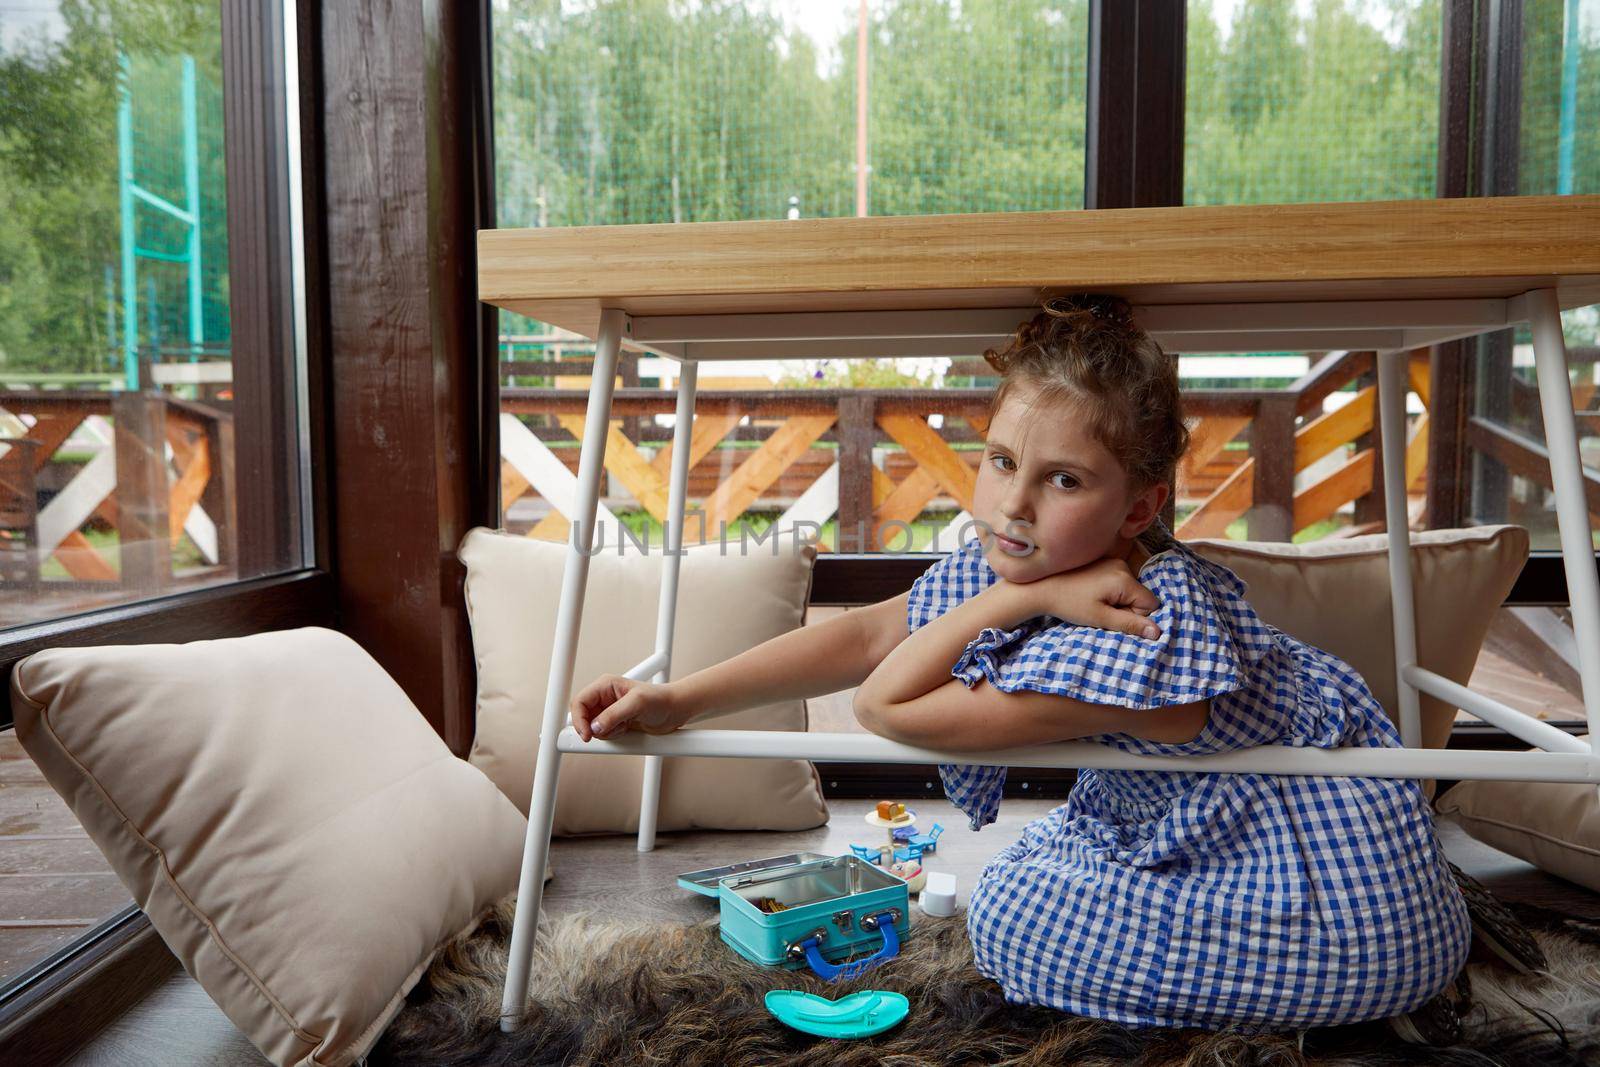 Girl in checkered dress looking at camera while sitting on floor near pillows and playing under table against large windows on weekend day